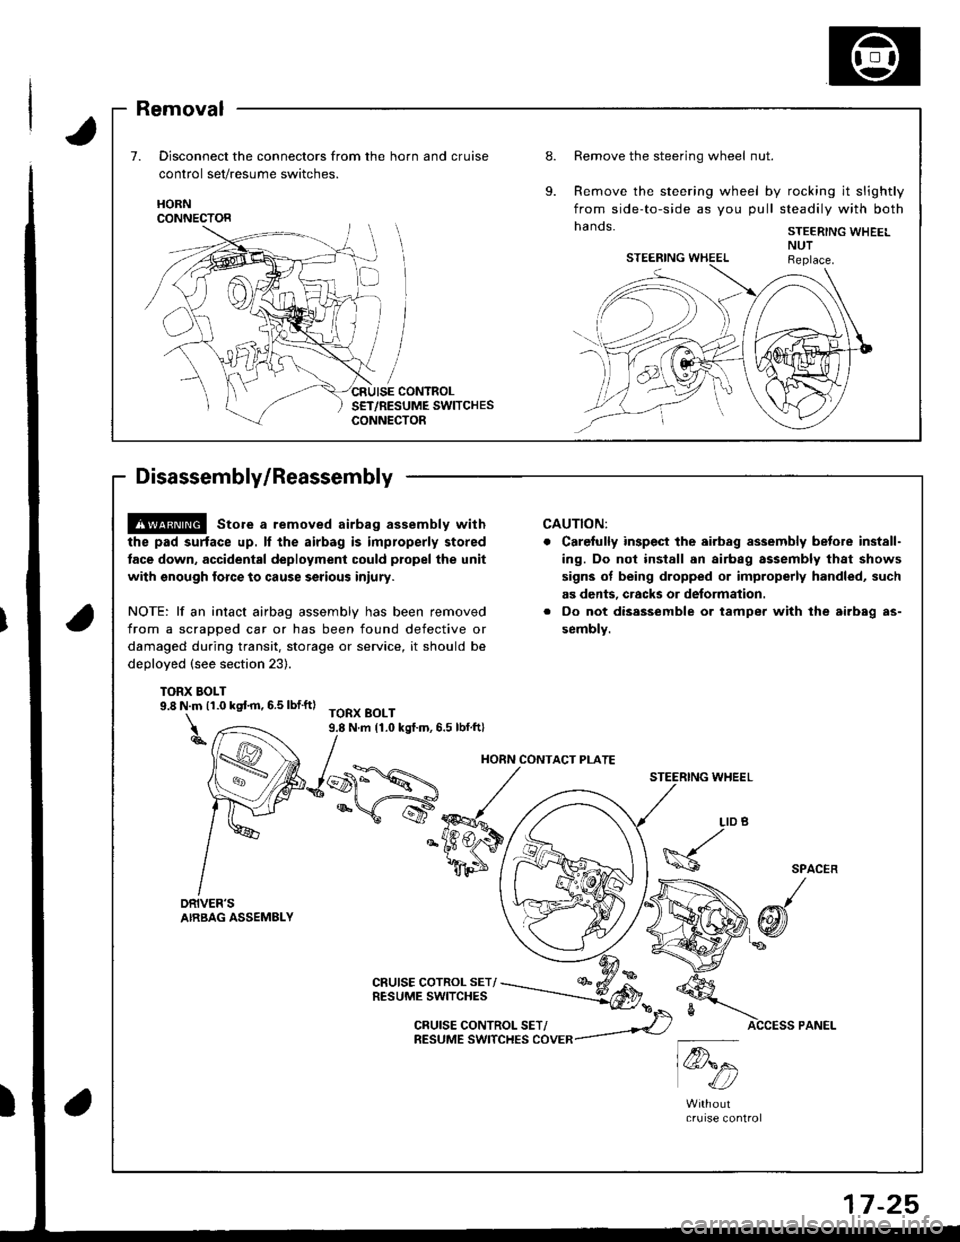 HONDA INTEGRA 1998 4.G Workshop Manual Removal
Disconnect the connectors from the horn and cruise
control set/resume switches.
Remove the steering wheel nut.
Remove the steering wheel by rocking it slightly
from side-to-side as you pull st